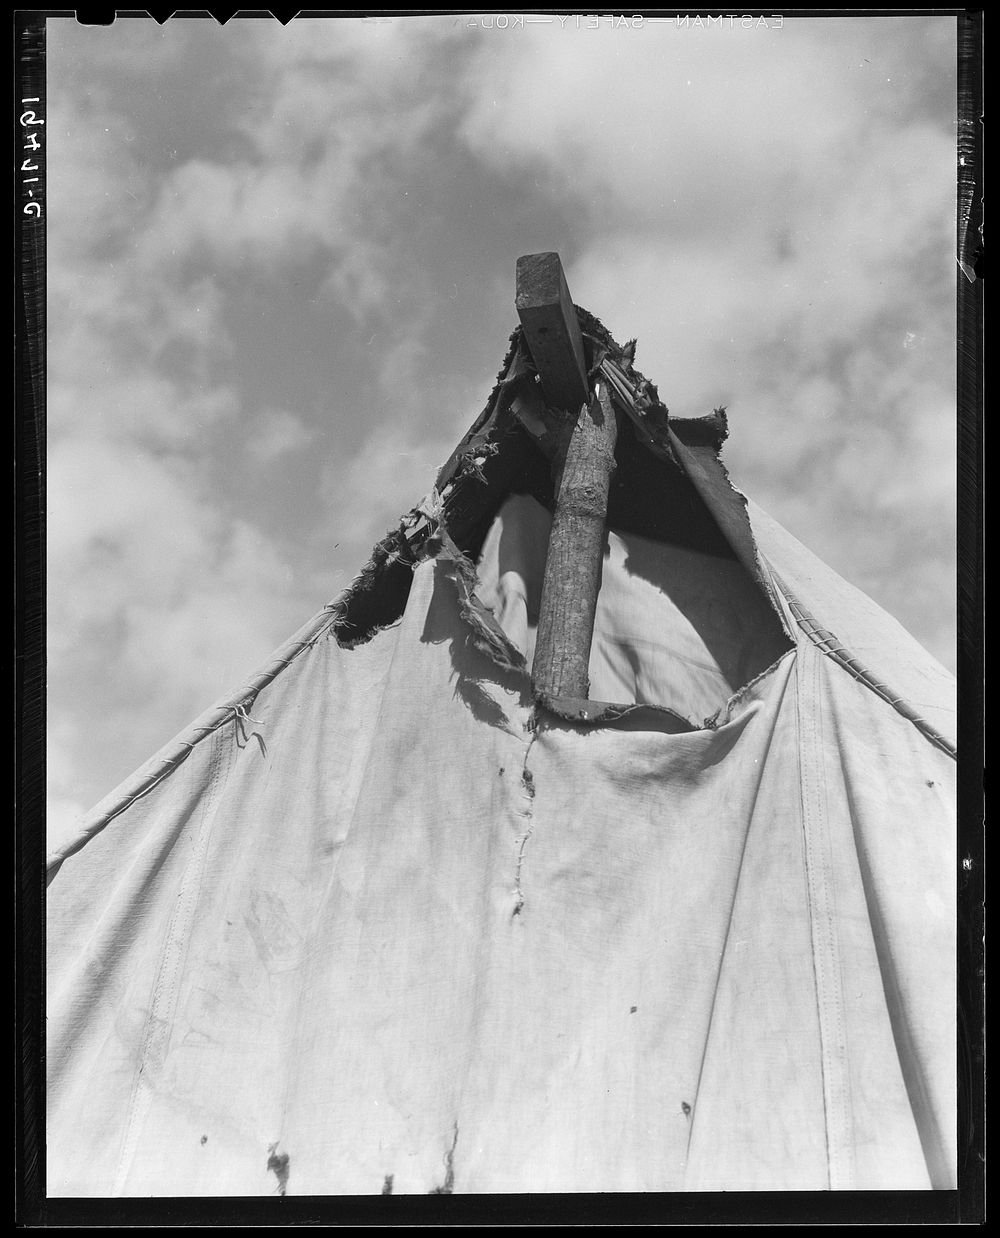 [Untitled photo, possibly related to: Pea picker's tent near San Jose, California]. Sourced from the Library of Congress.